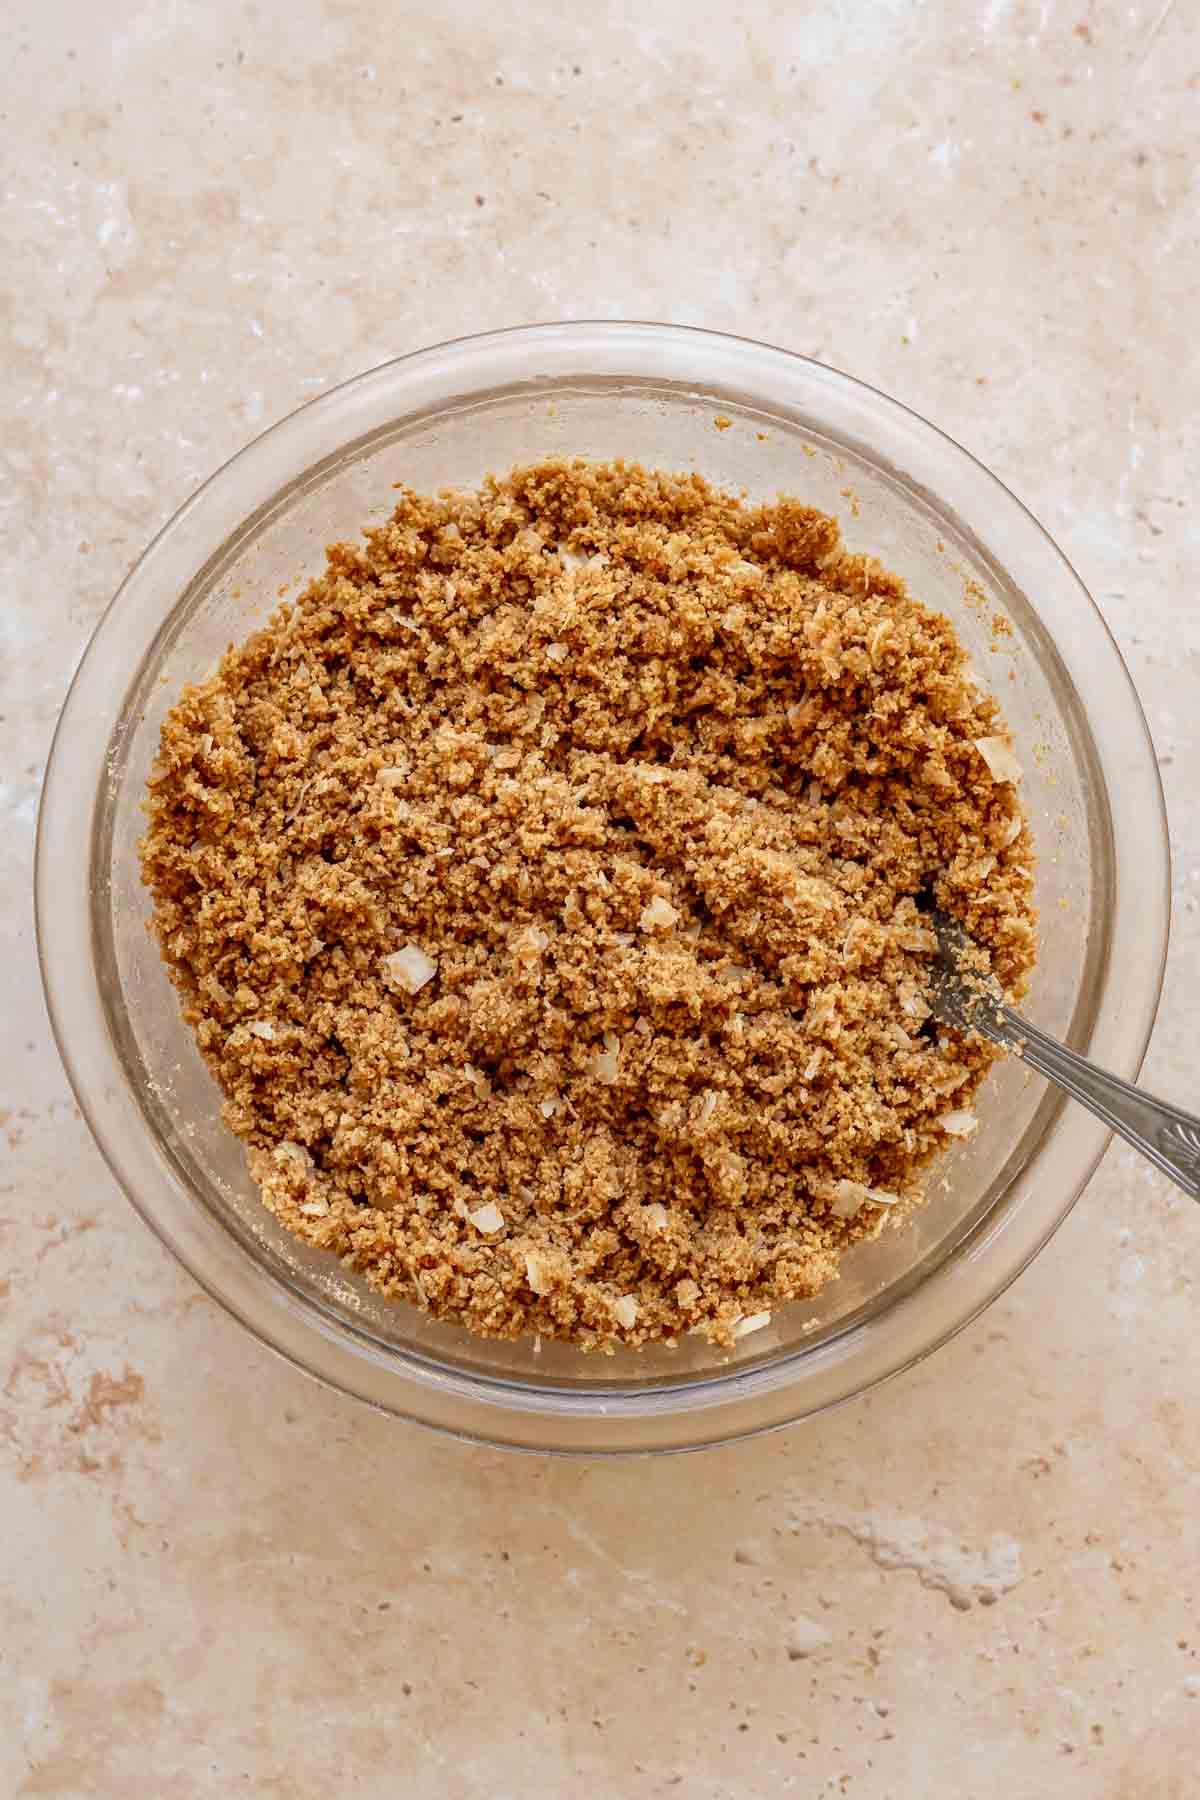 Graham cracker crust mixed together in a bowl.